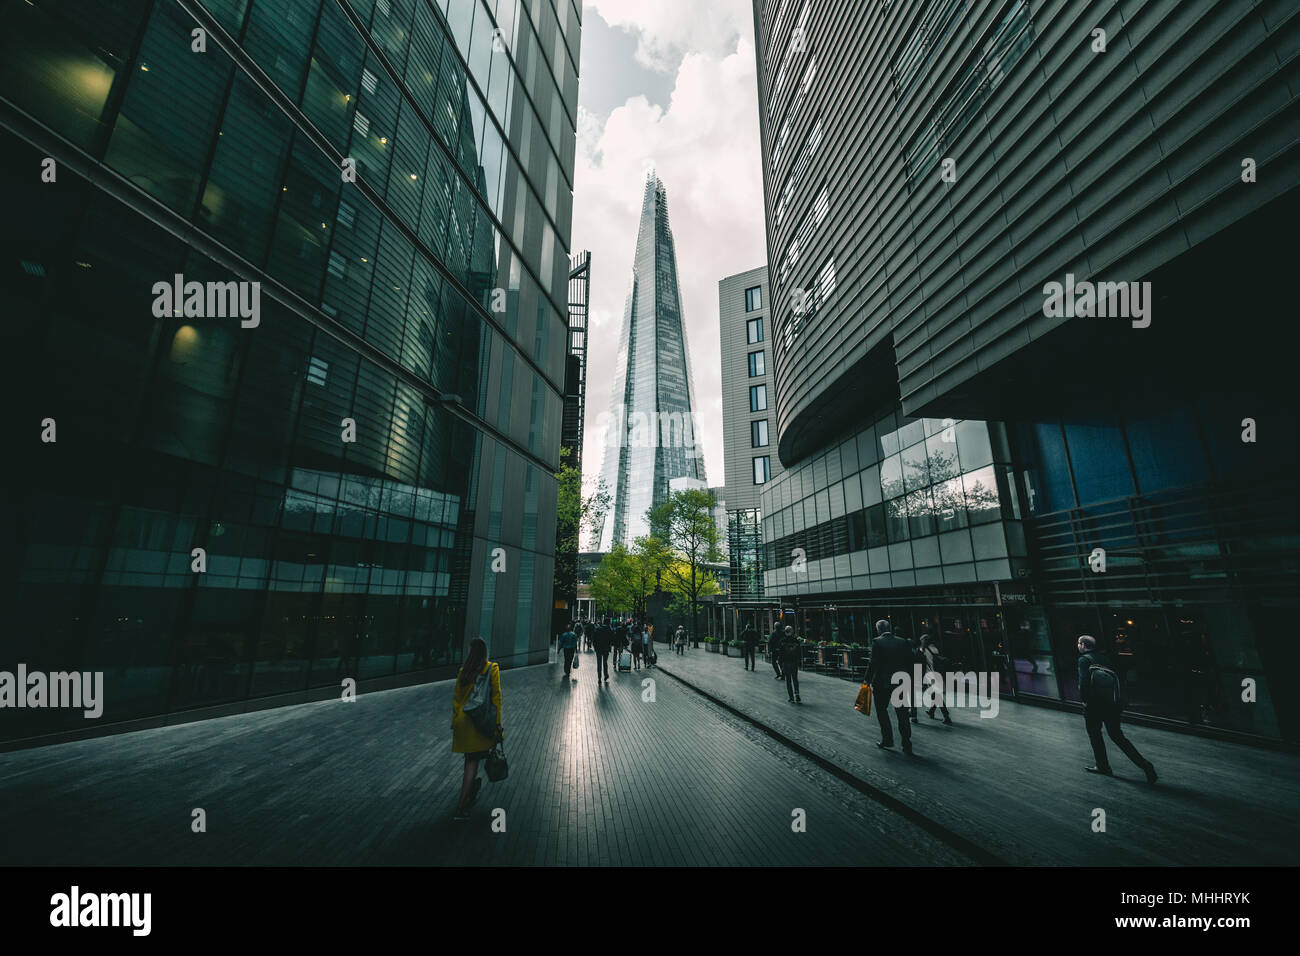 LONDON - APRIL 26, 2018: People walking towards the Shard building in London Stock Photo